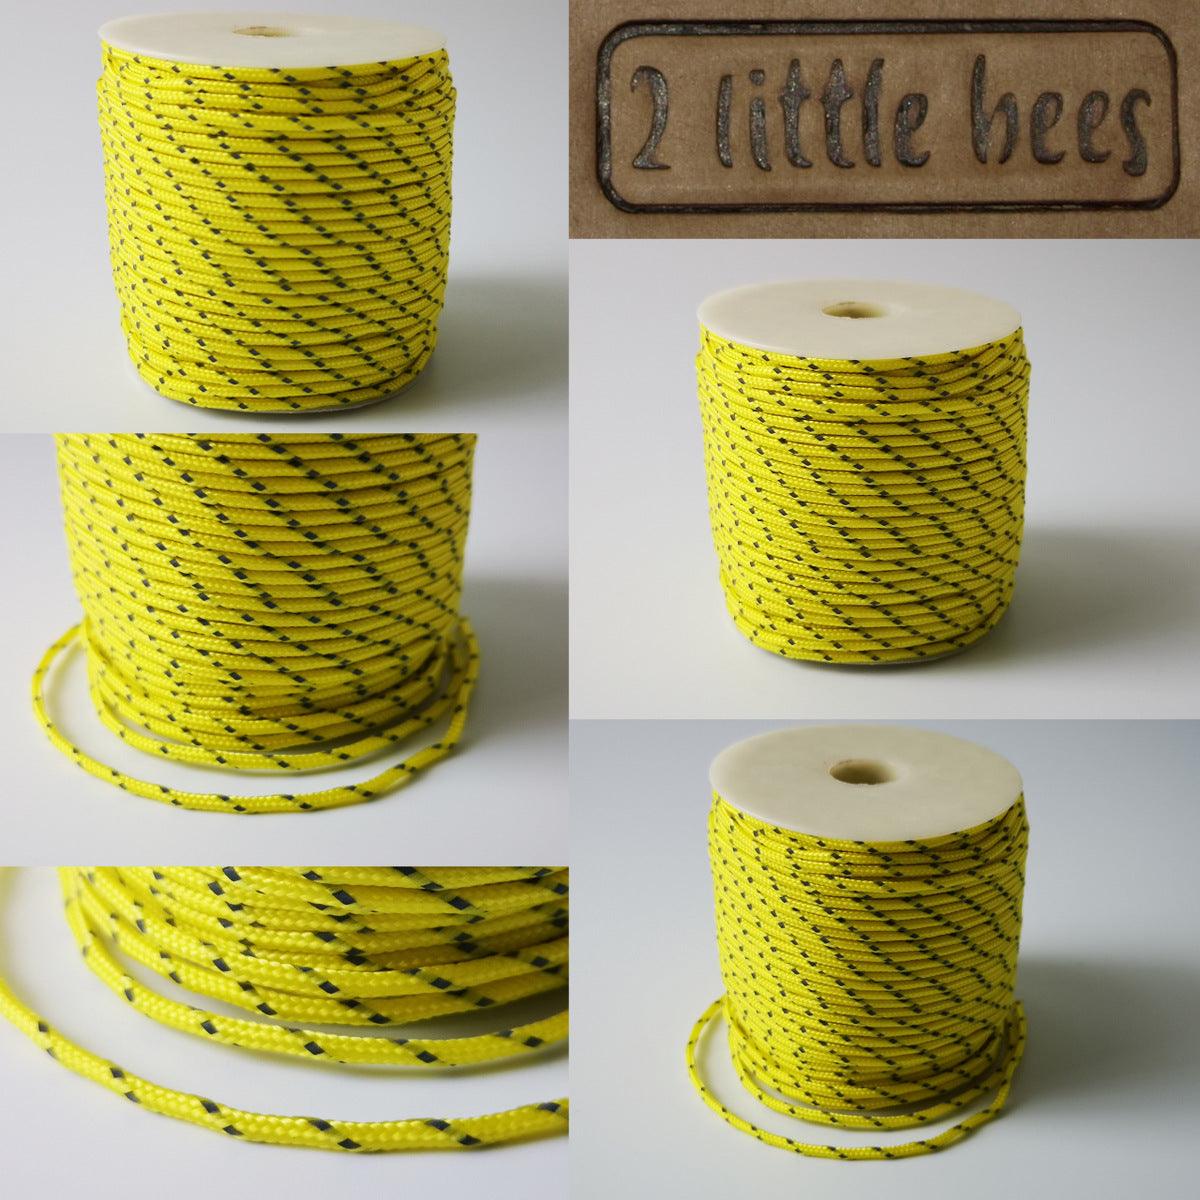 2mm yellow reflective paracord – 2 little bees